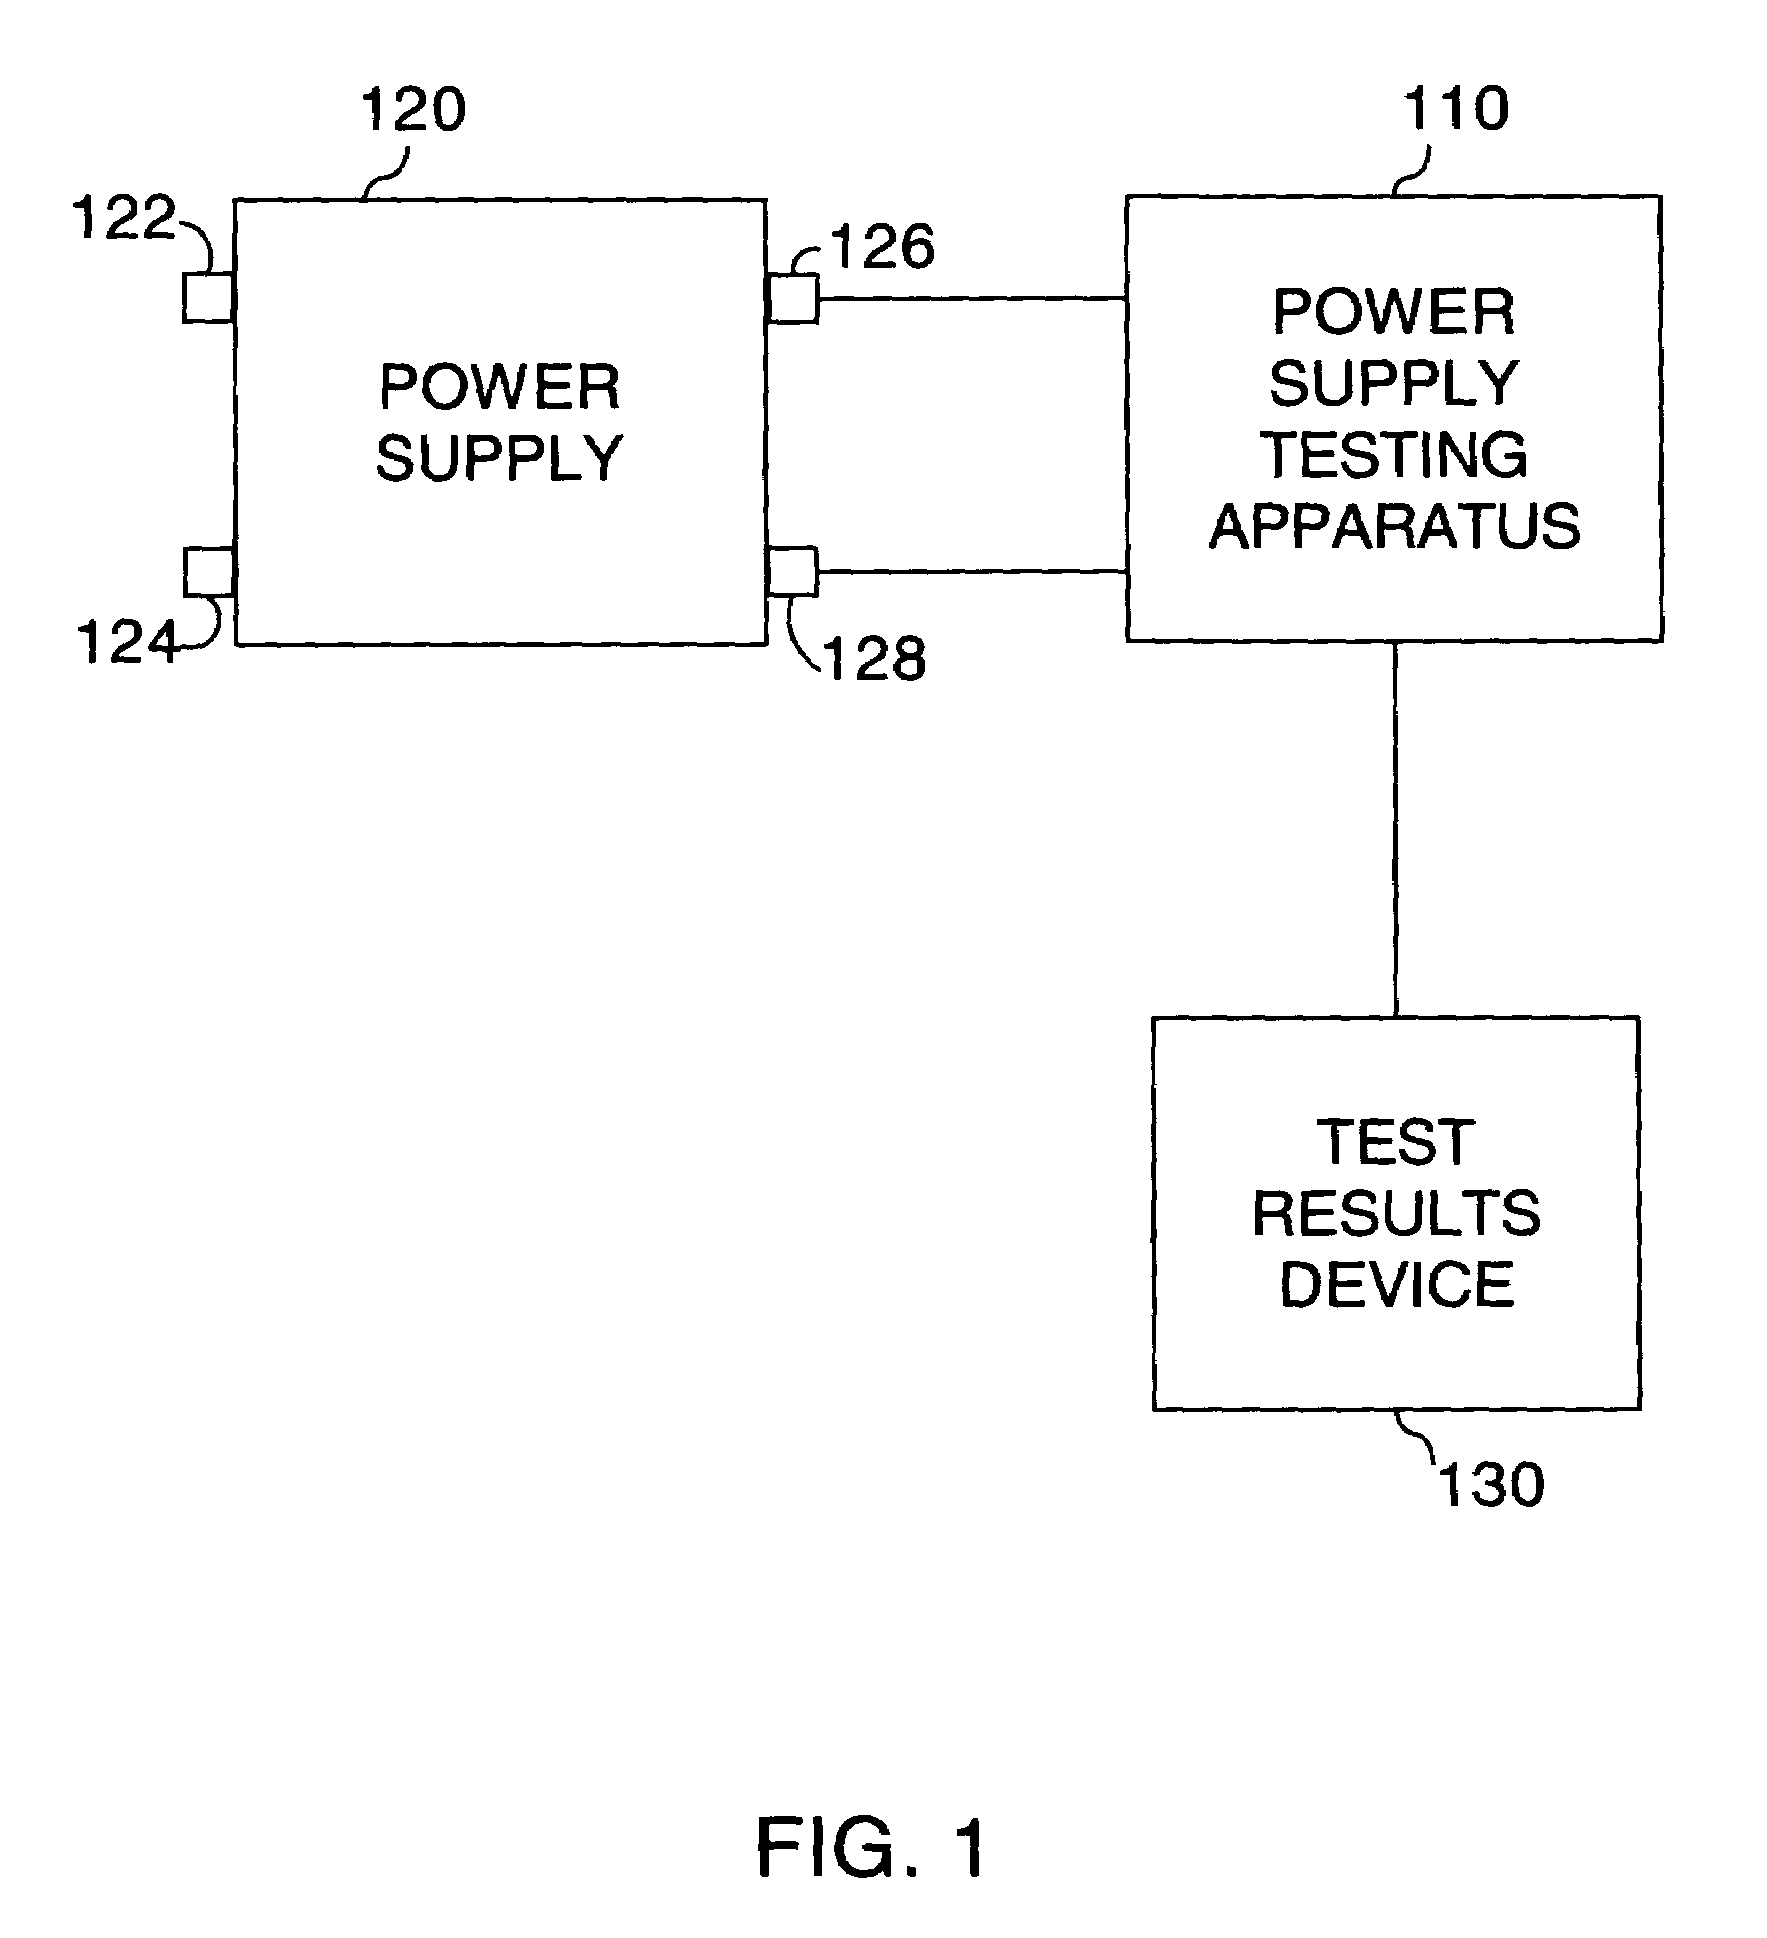 Apparatus for testing a power supply